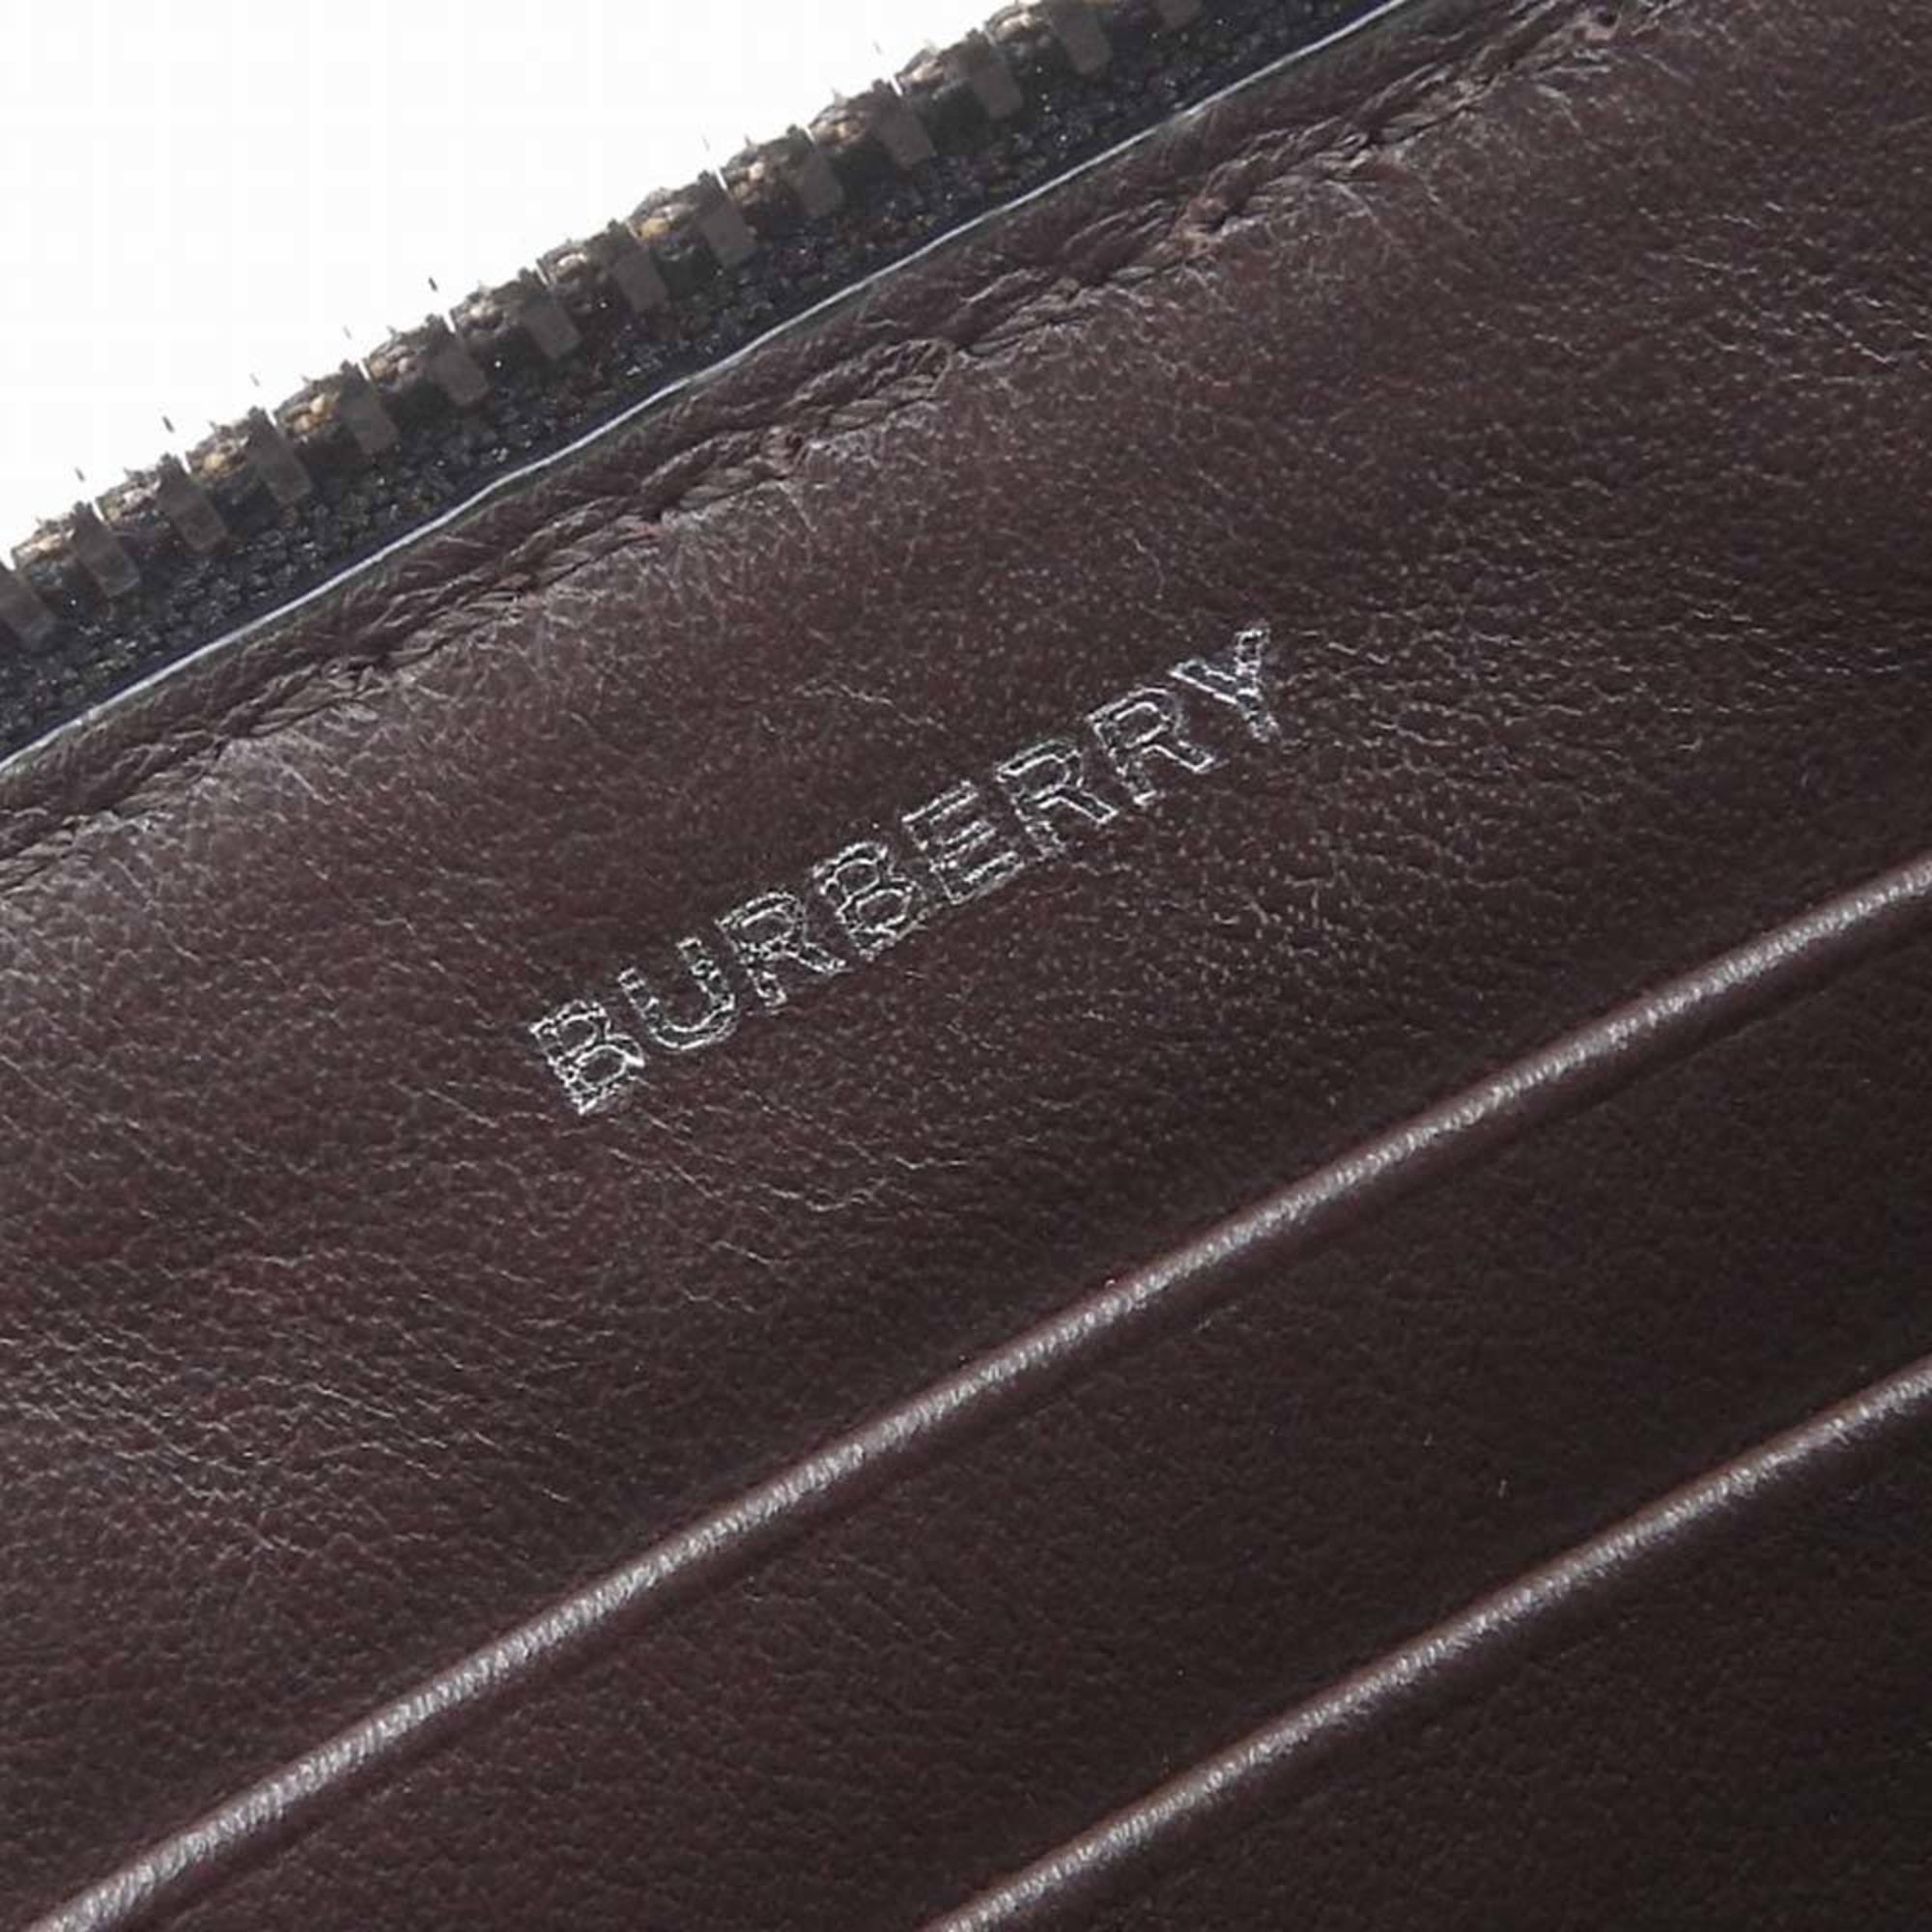 Burberry BURBERRY Harako Pattern Clutch Bag Patent Leather White x Brown 8016991 Animal